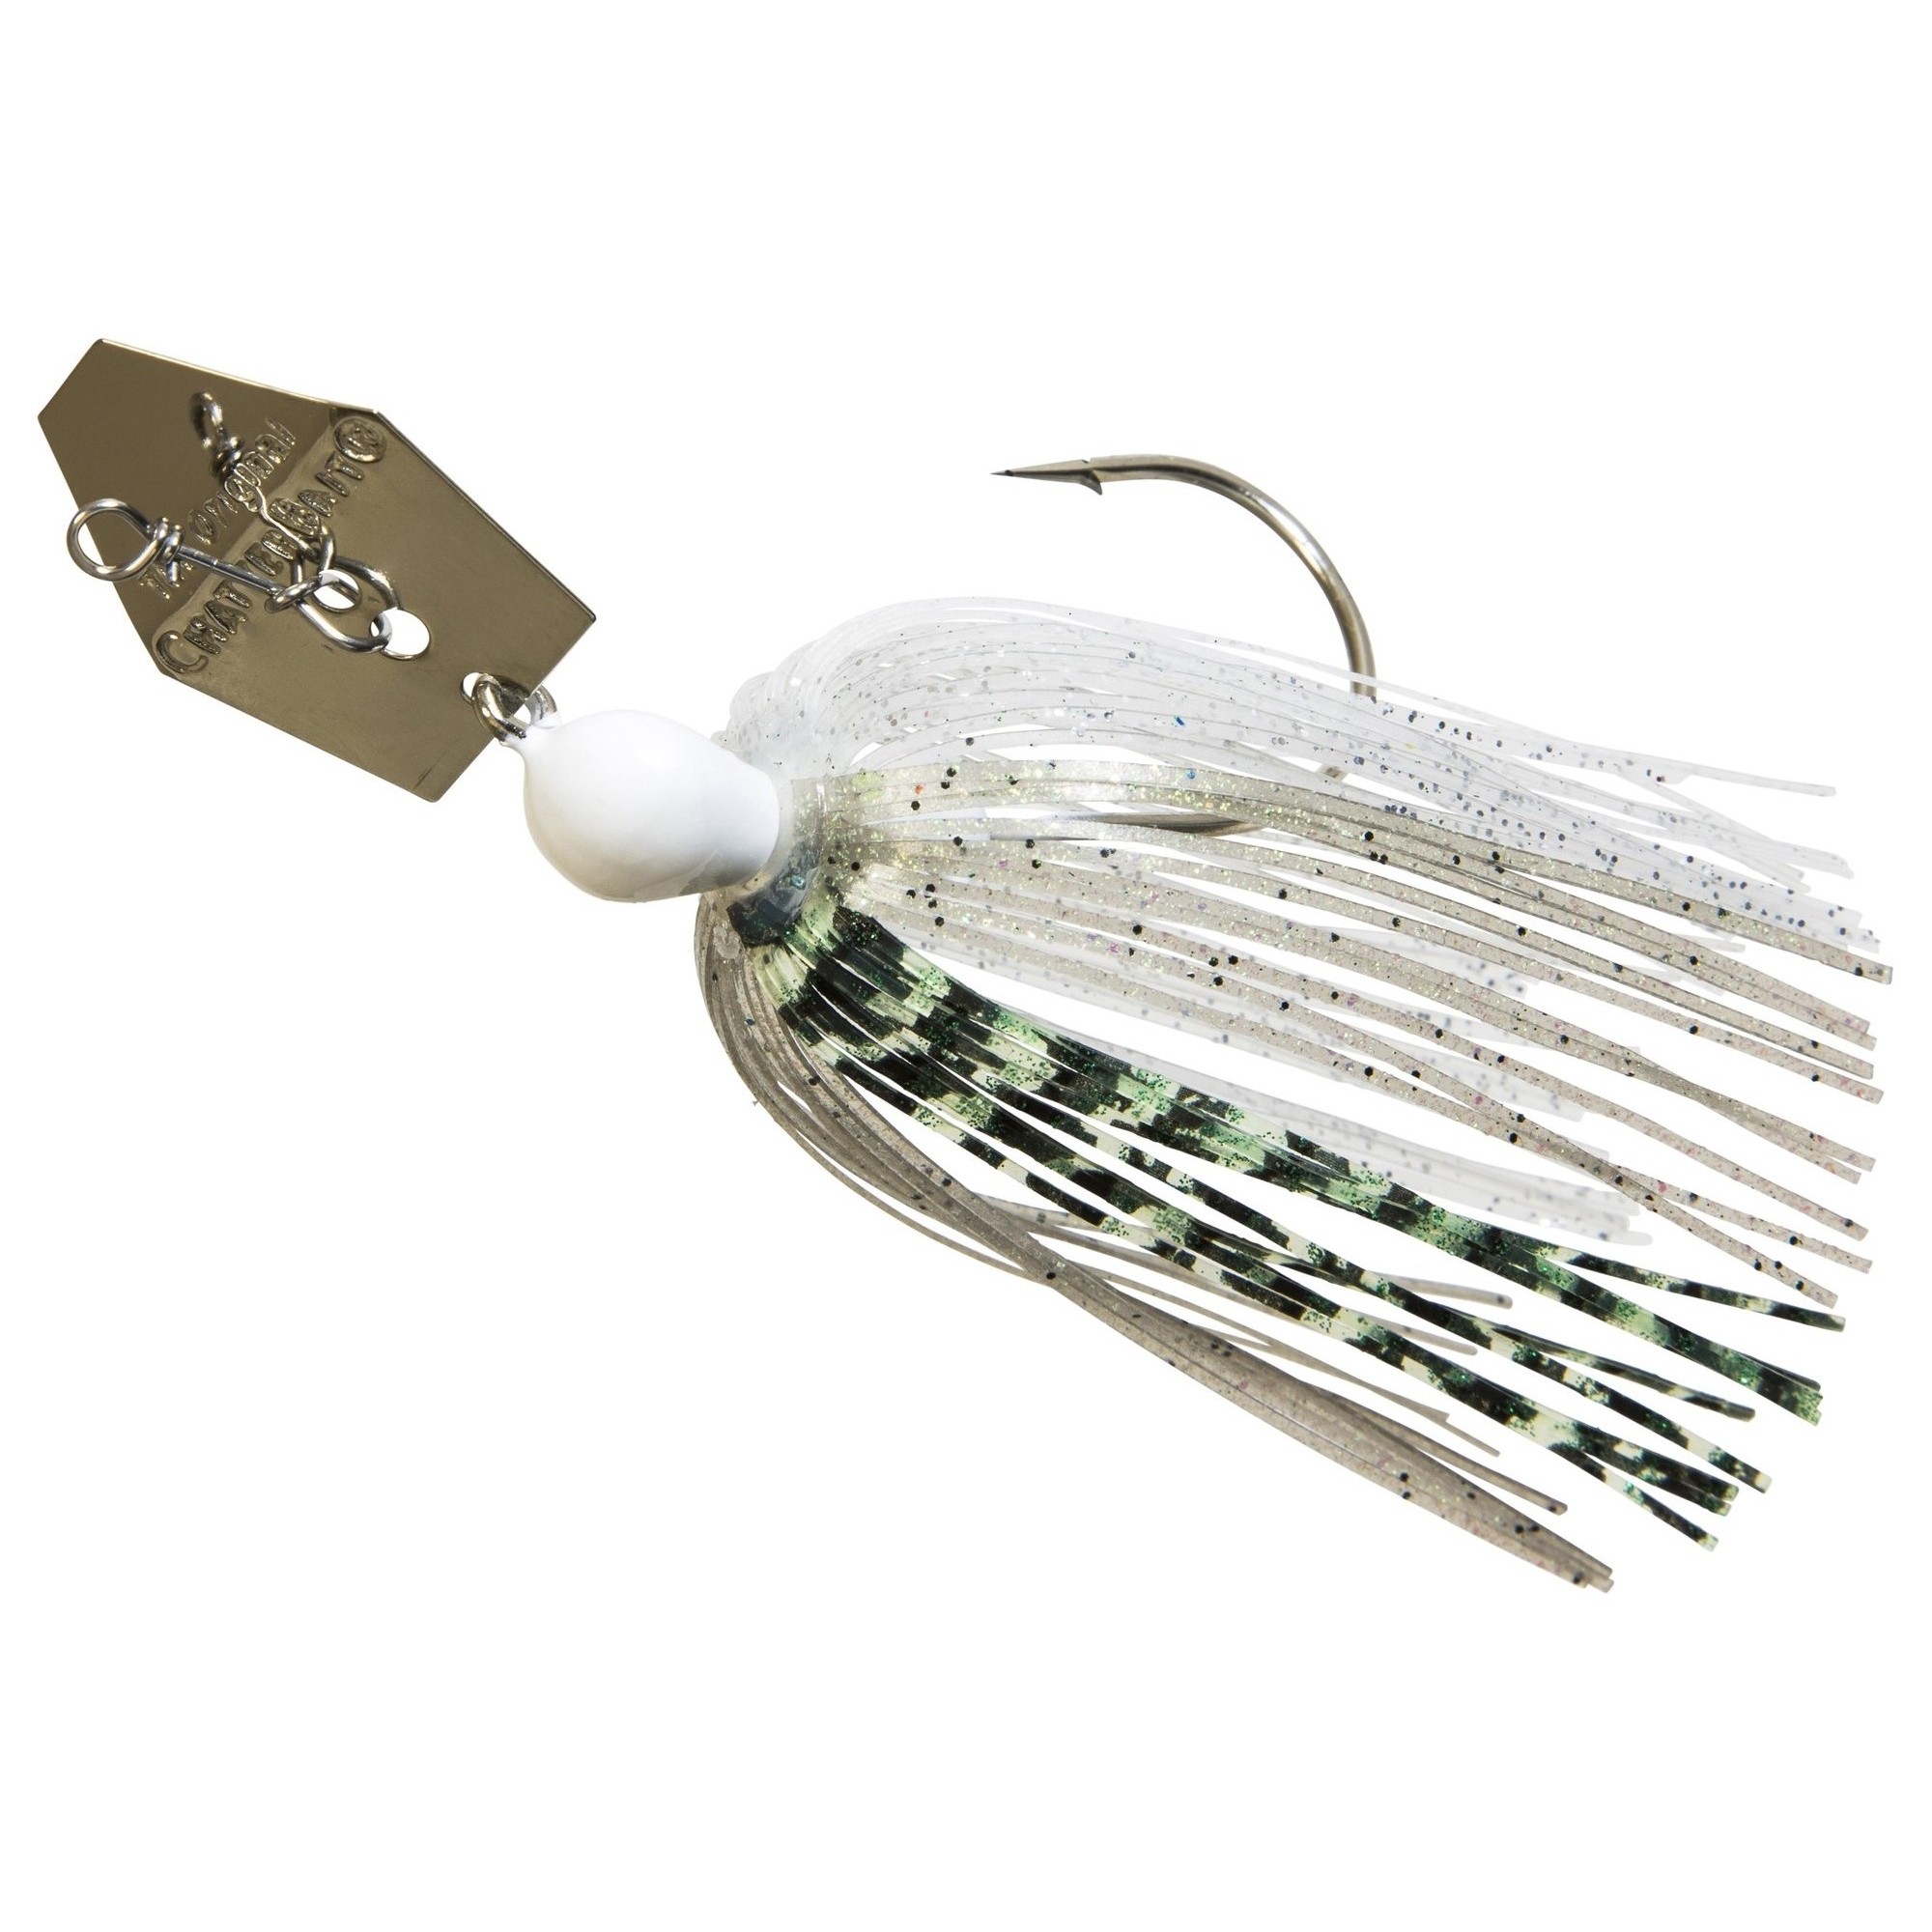 Esche-metalliche-chatterbait-chatter-bladed-jig-z-man-the-original-chatterbait-72-green-back-shad-lure-fishing-planet.